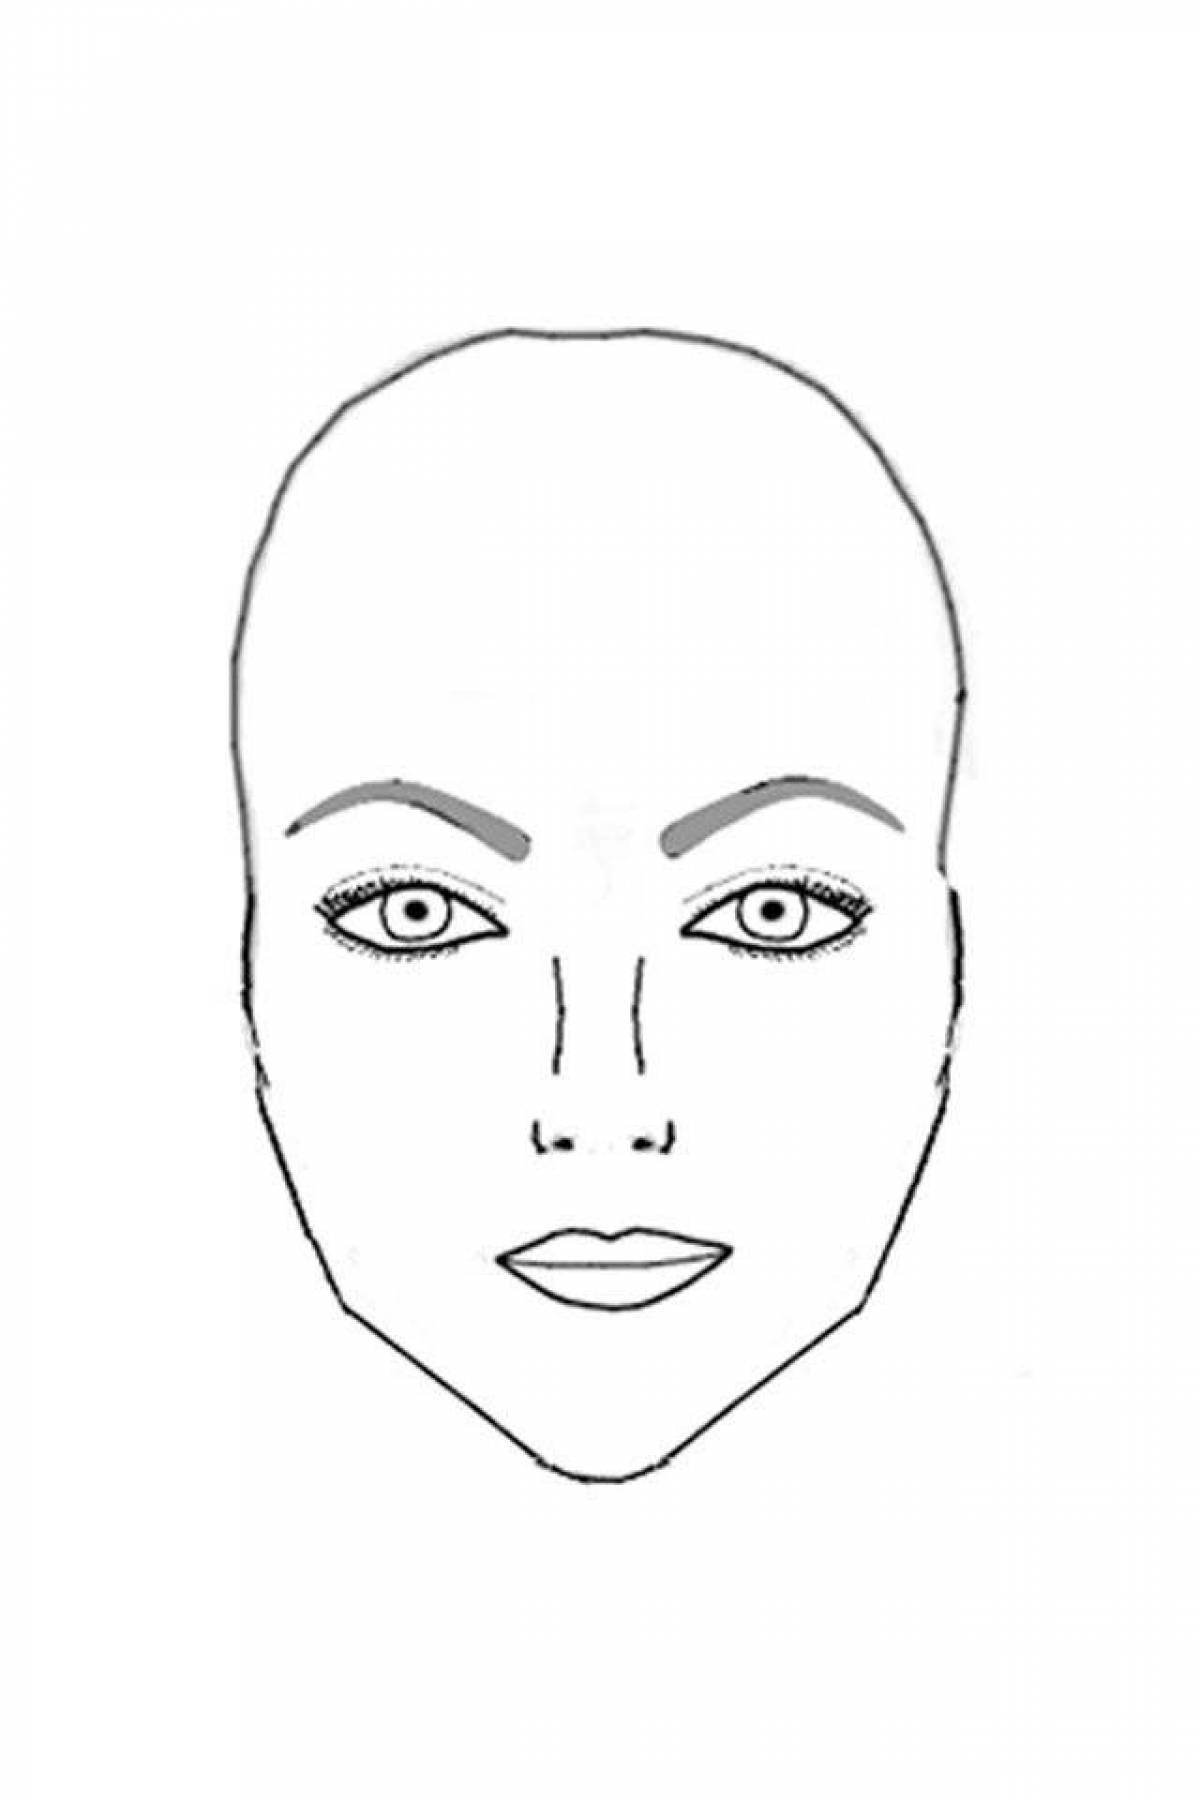 Charming makeup face coloring page